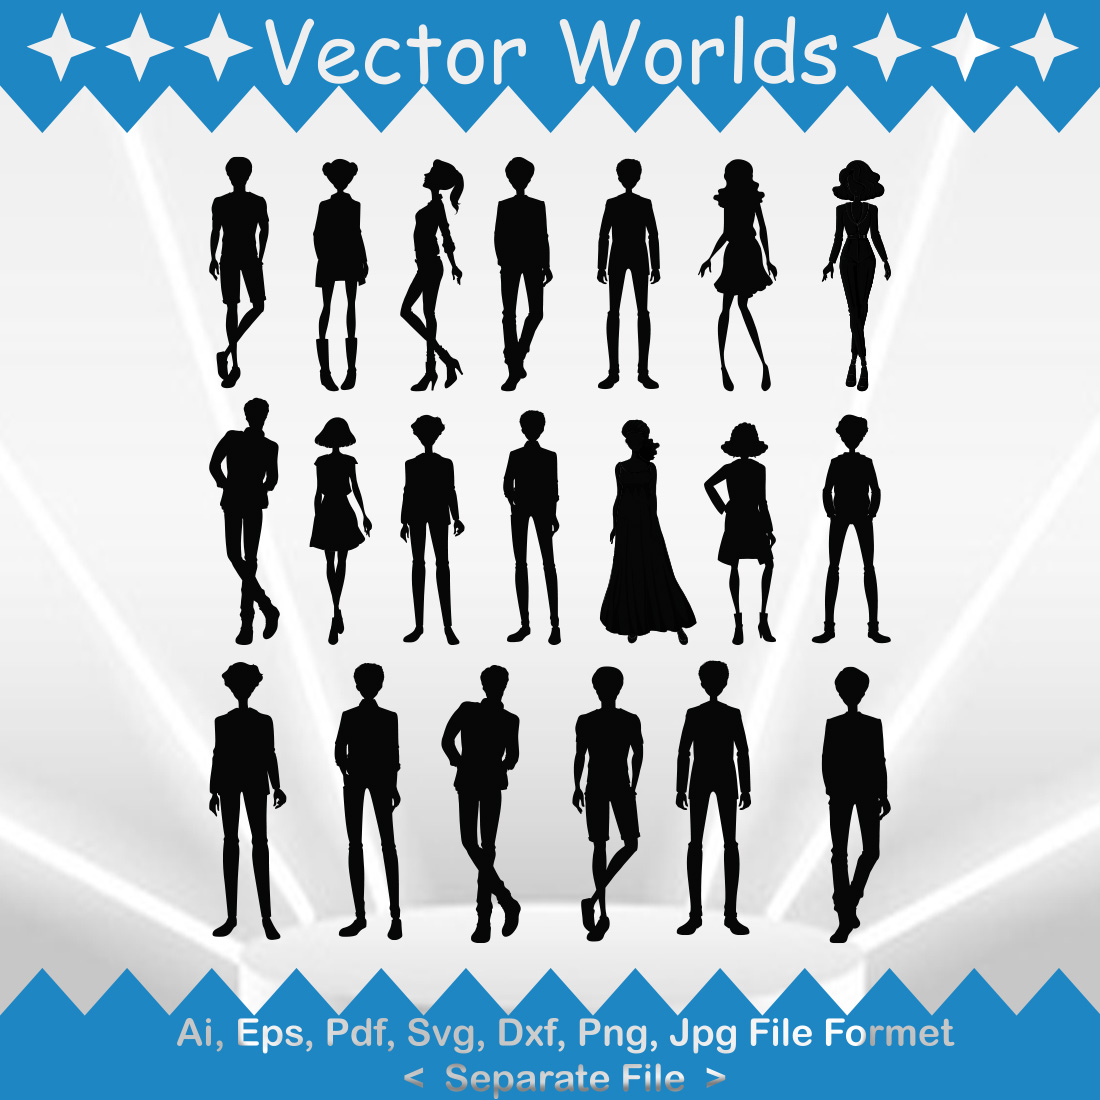 Character SVG Vector Design cover image.